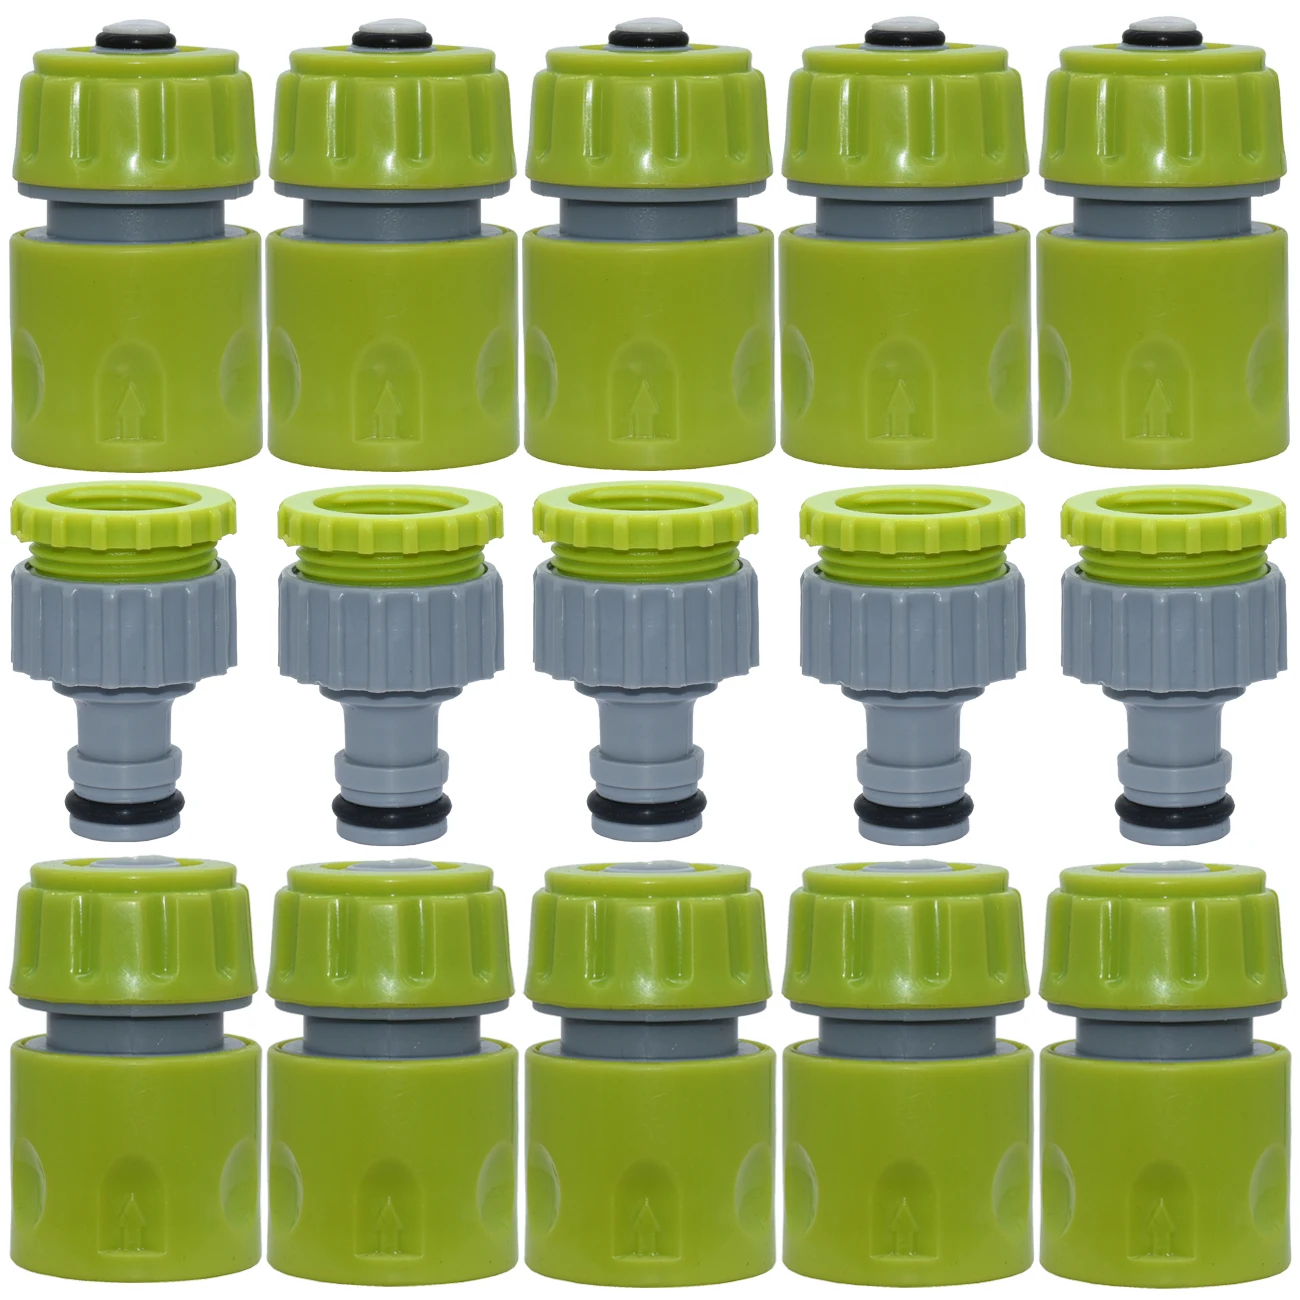 KESLA 10PCS 16mm Hose Garden Tap Water Hose Pipe 1/2 inch Connector Quick Connect Adapter Fitting Repair Watering Greenhouse